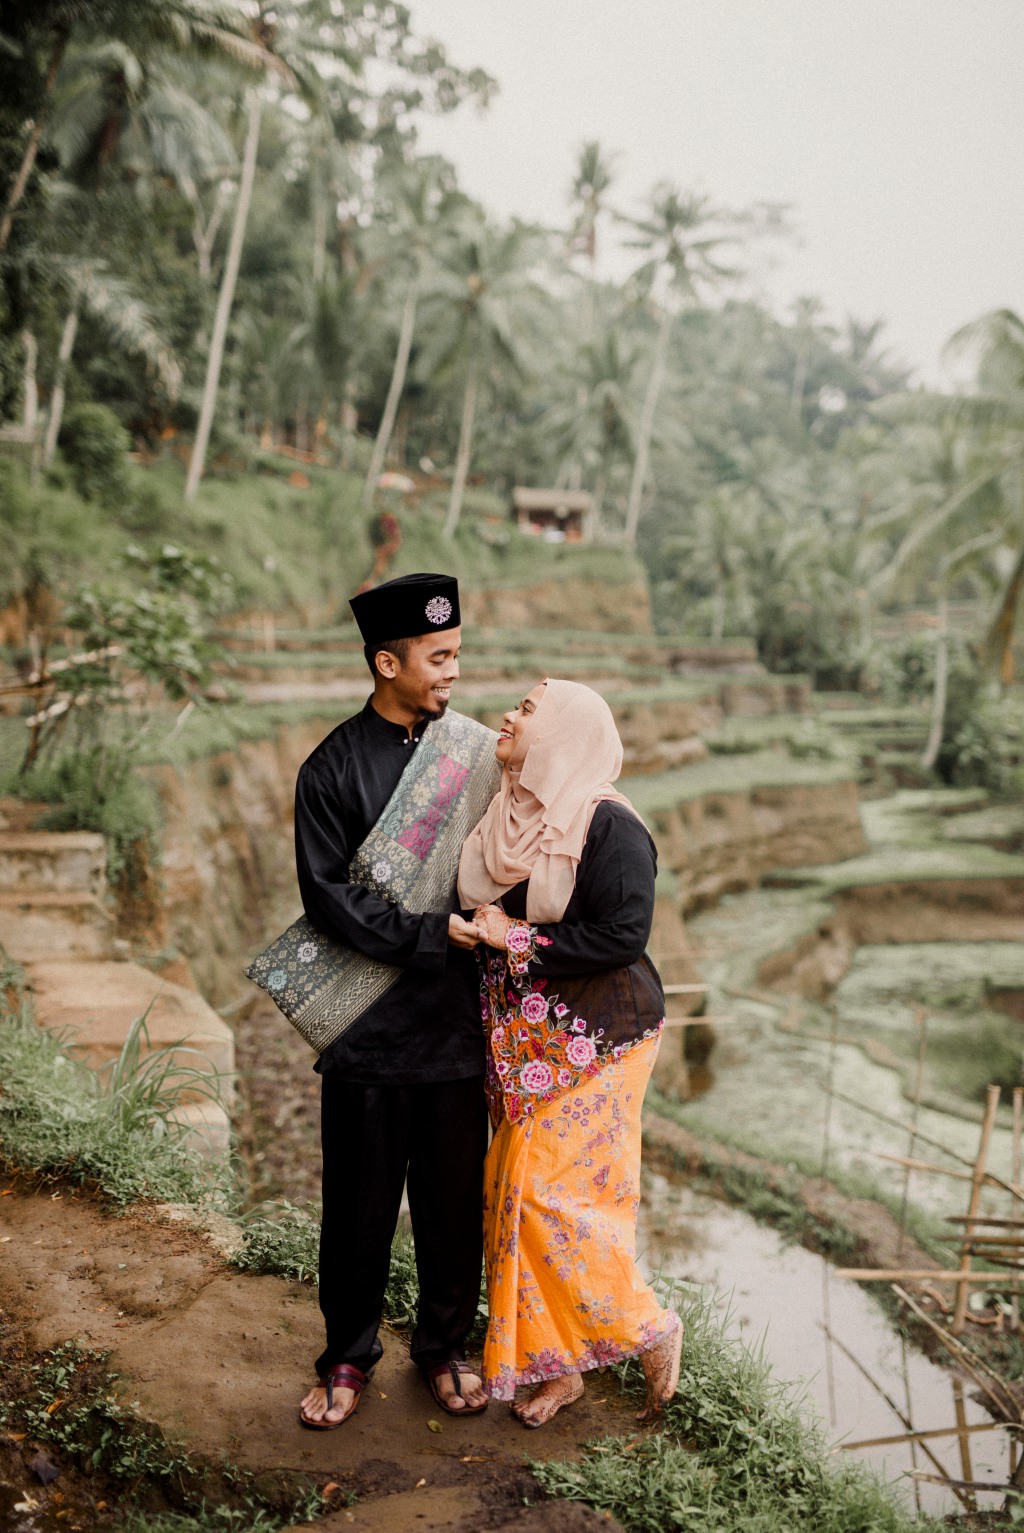 Bali Honeymoon Photography: Post-Wedding Photoshoot For Malay Couple At Tegallalang Rice Paddies  by Dex on OneThreeOneFour 20